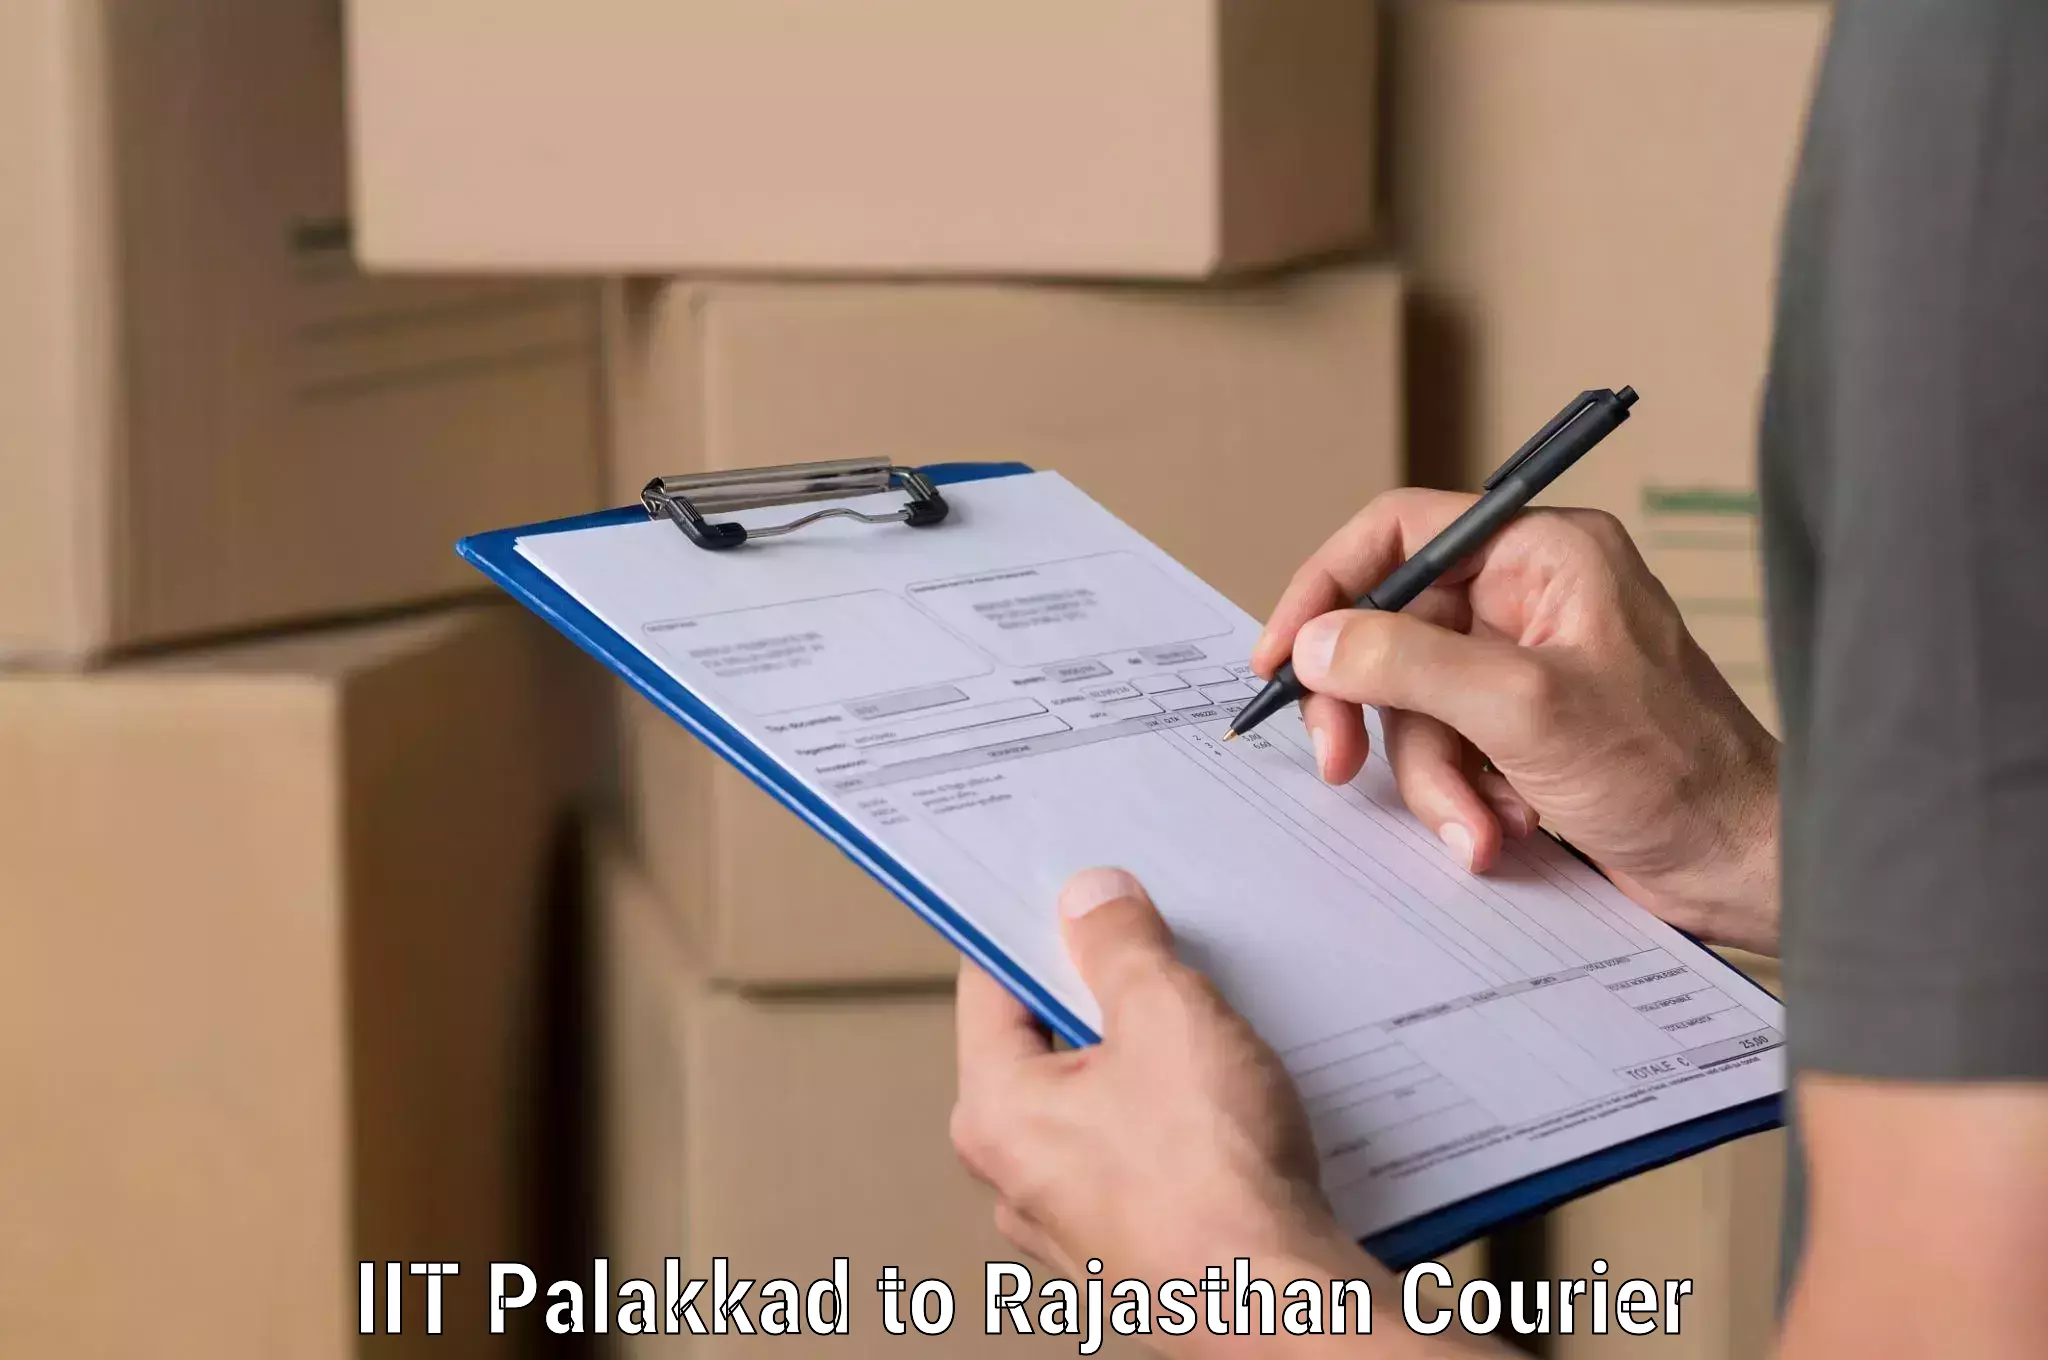 Supply chain delivery IIT Palakkad to Rajasthan